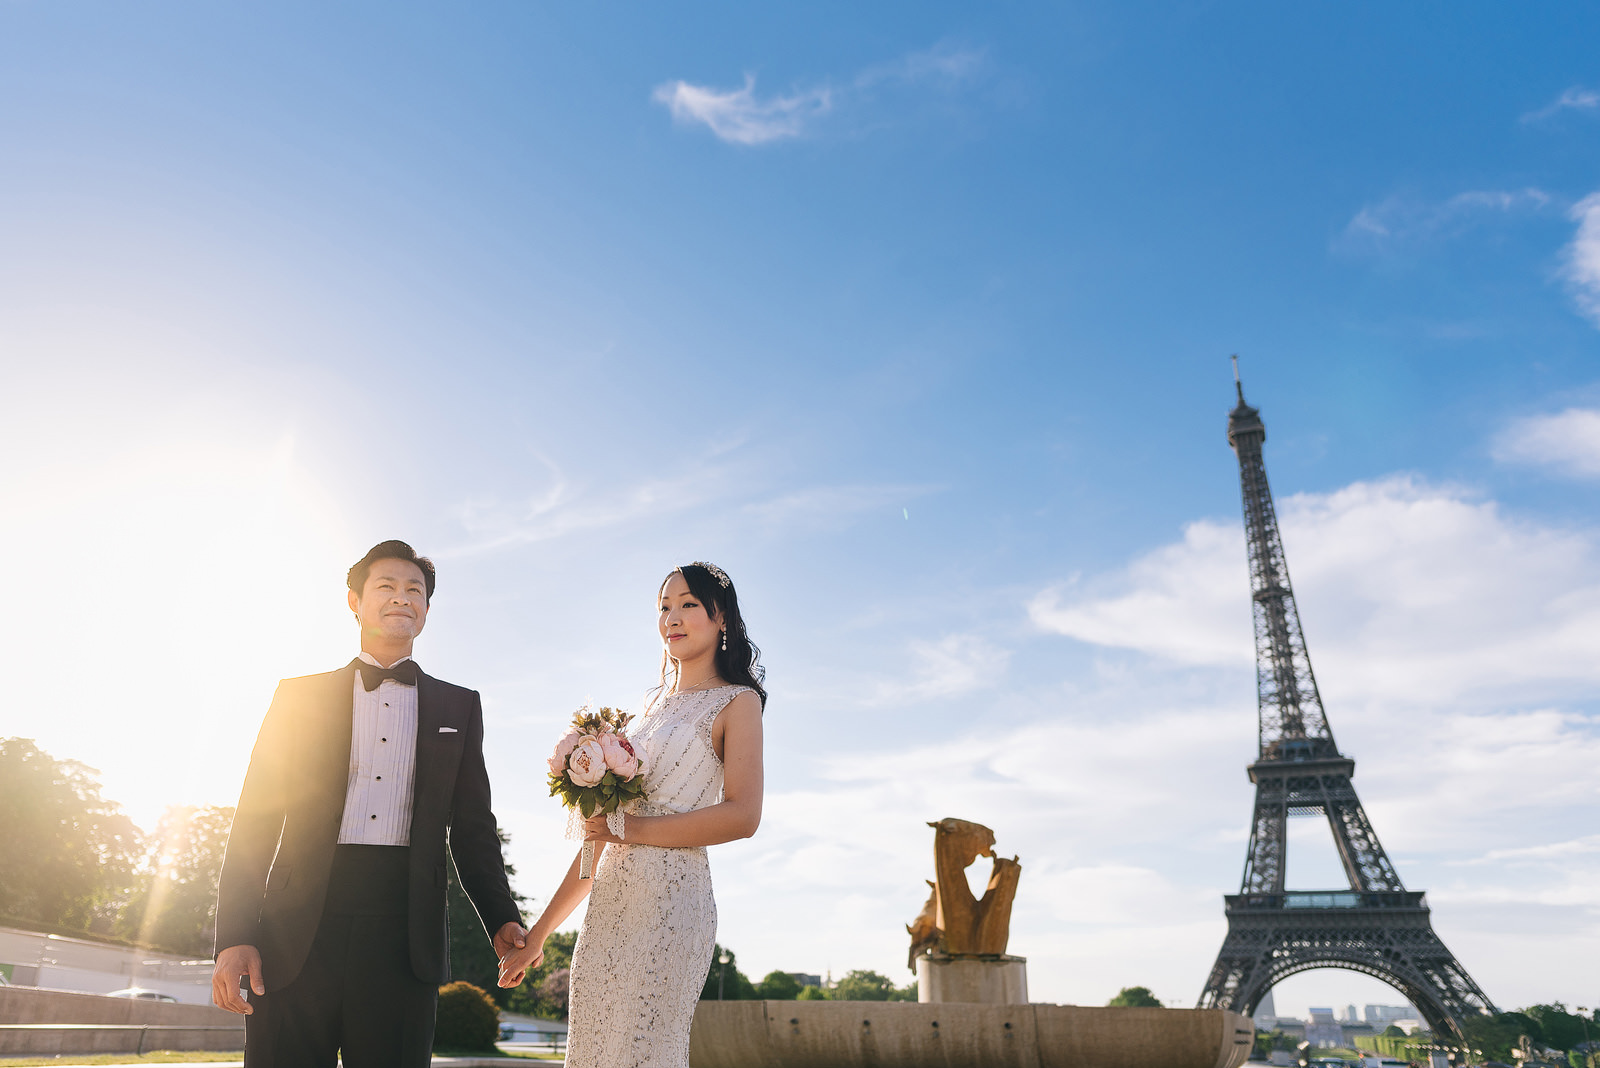 Pre-wedding photography at the Eiffel Tower in Paris